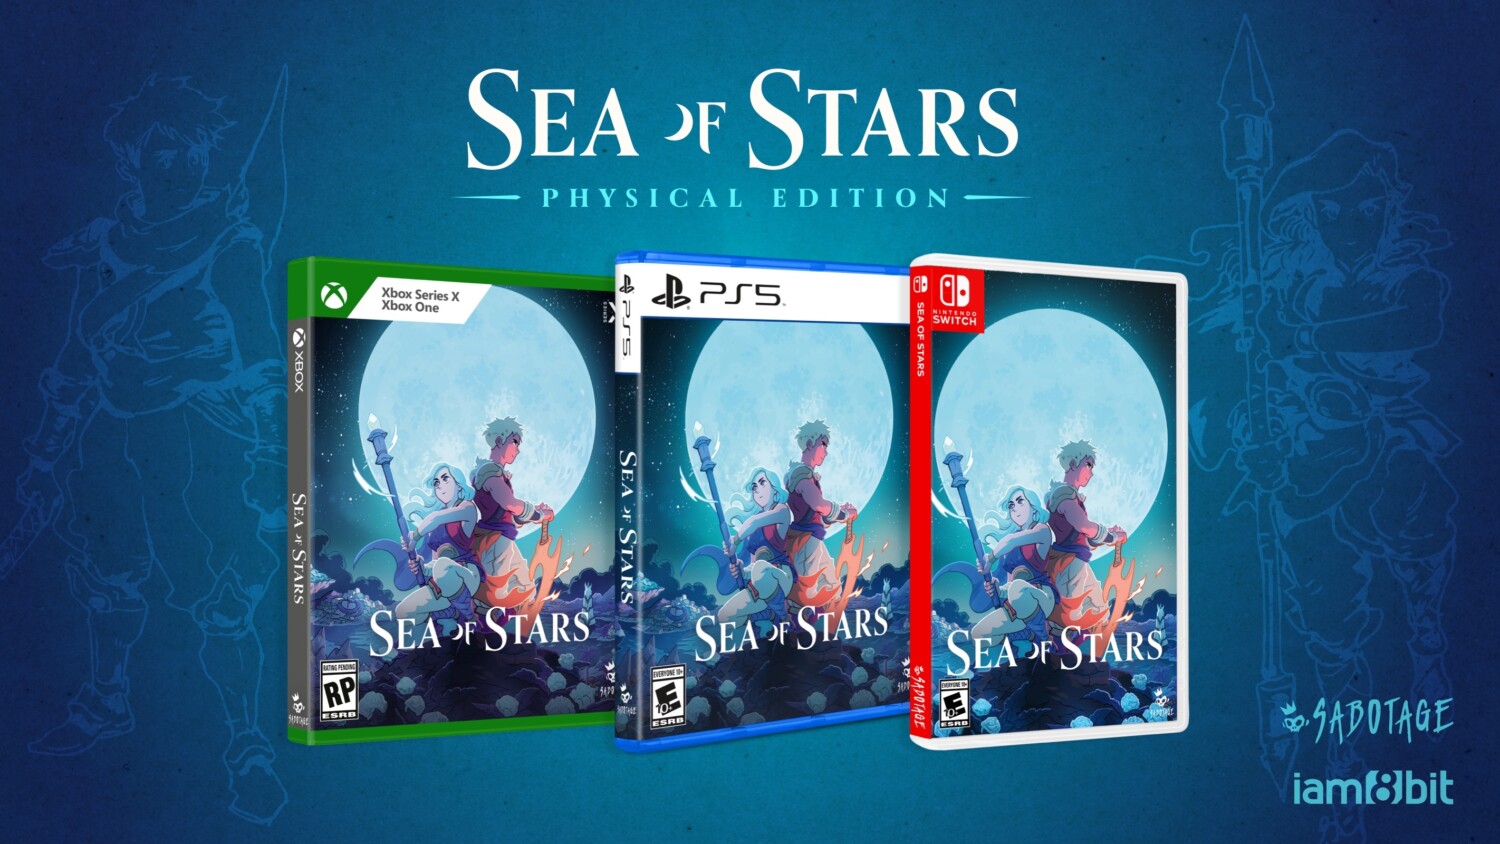 Sea Of Stars Switch Physical Edition Announced By iam8bit, Coming Early